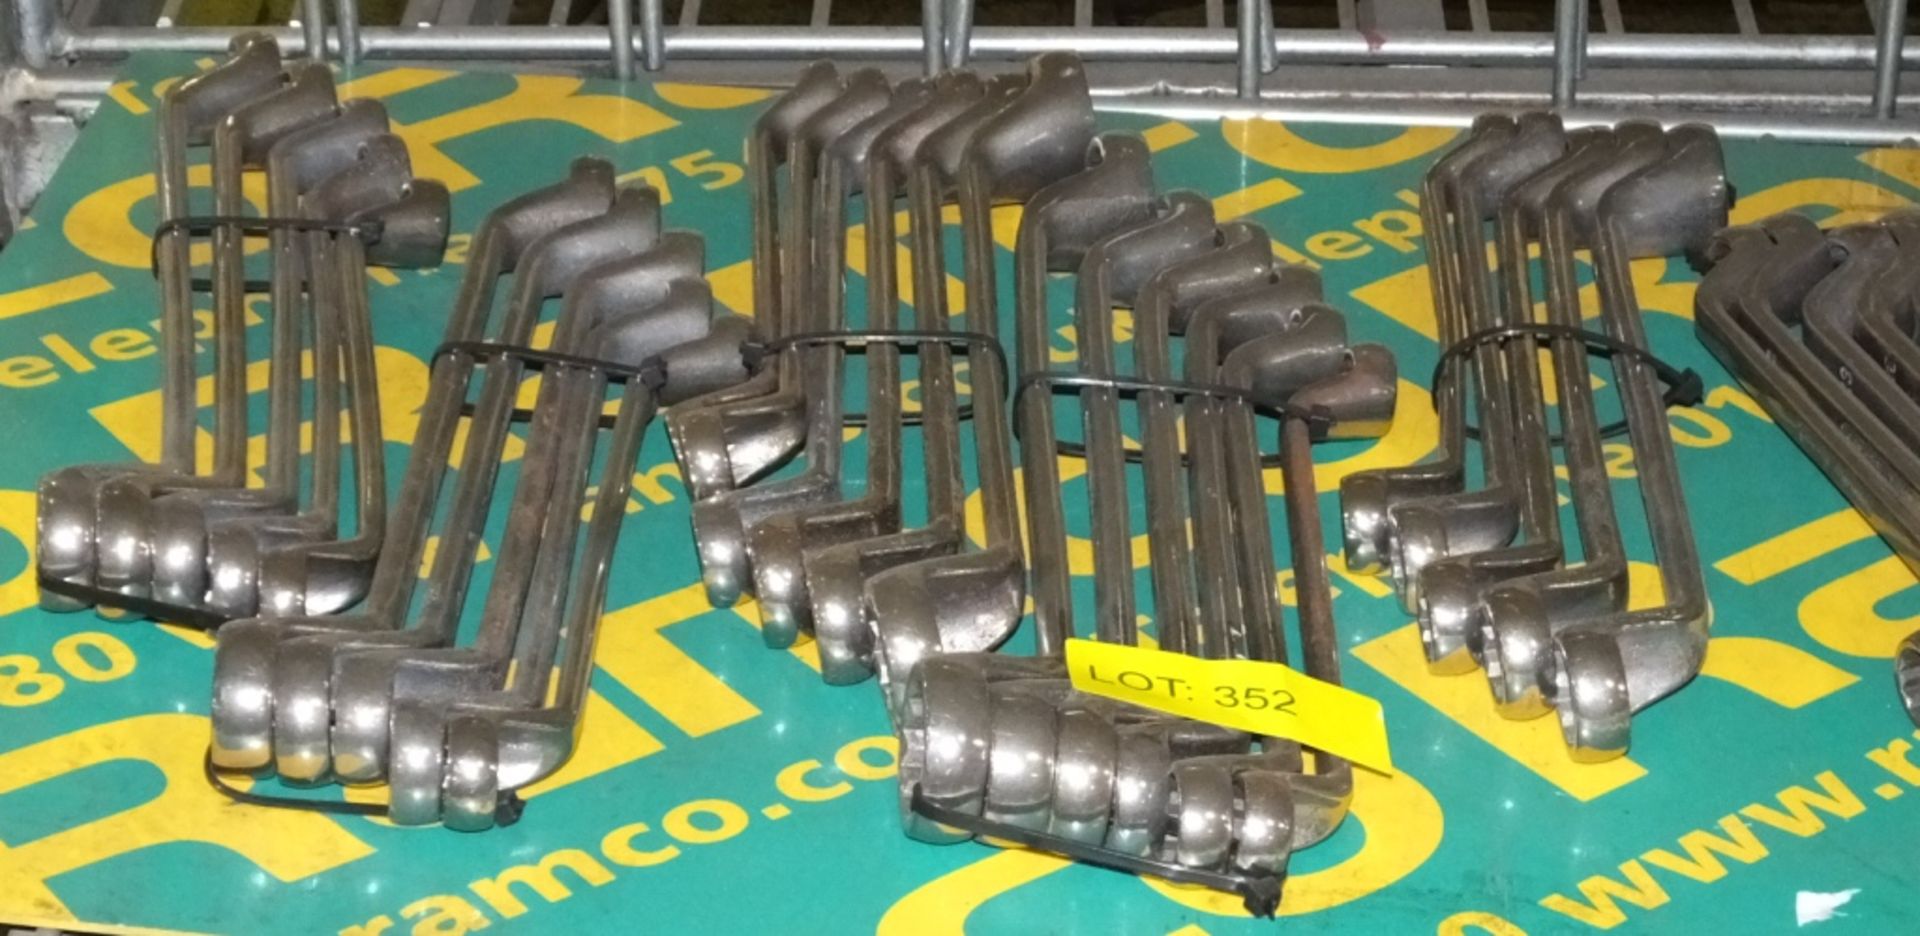 8 sets of Ring Spanners - Image 3 of 3